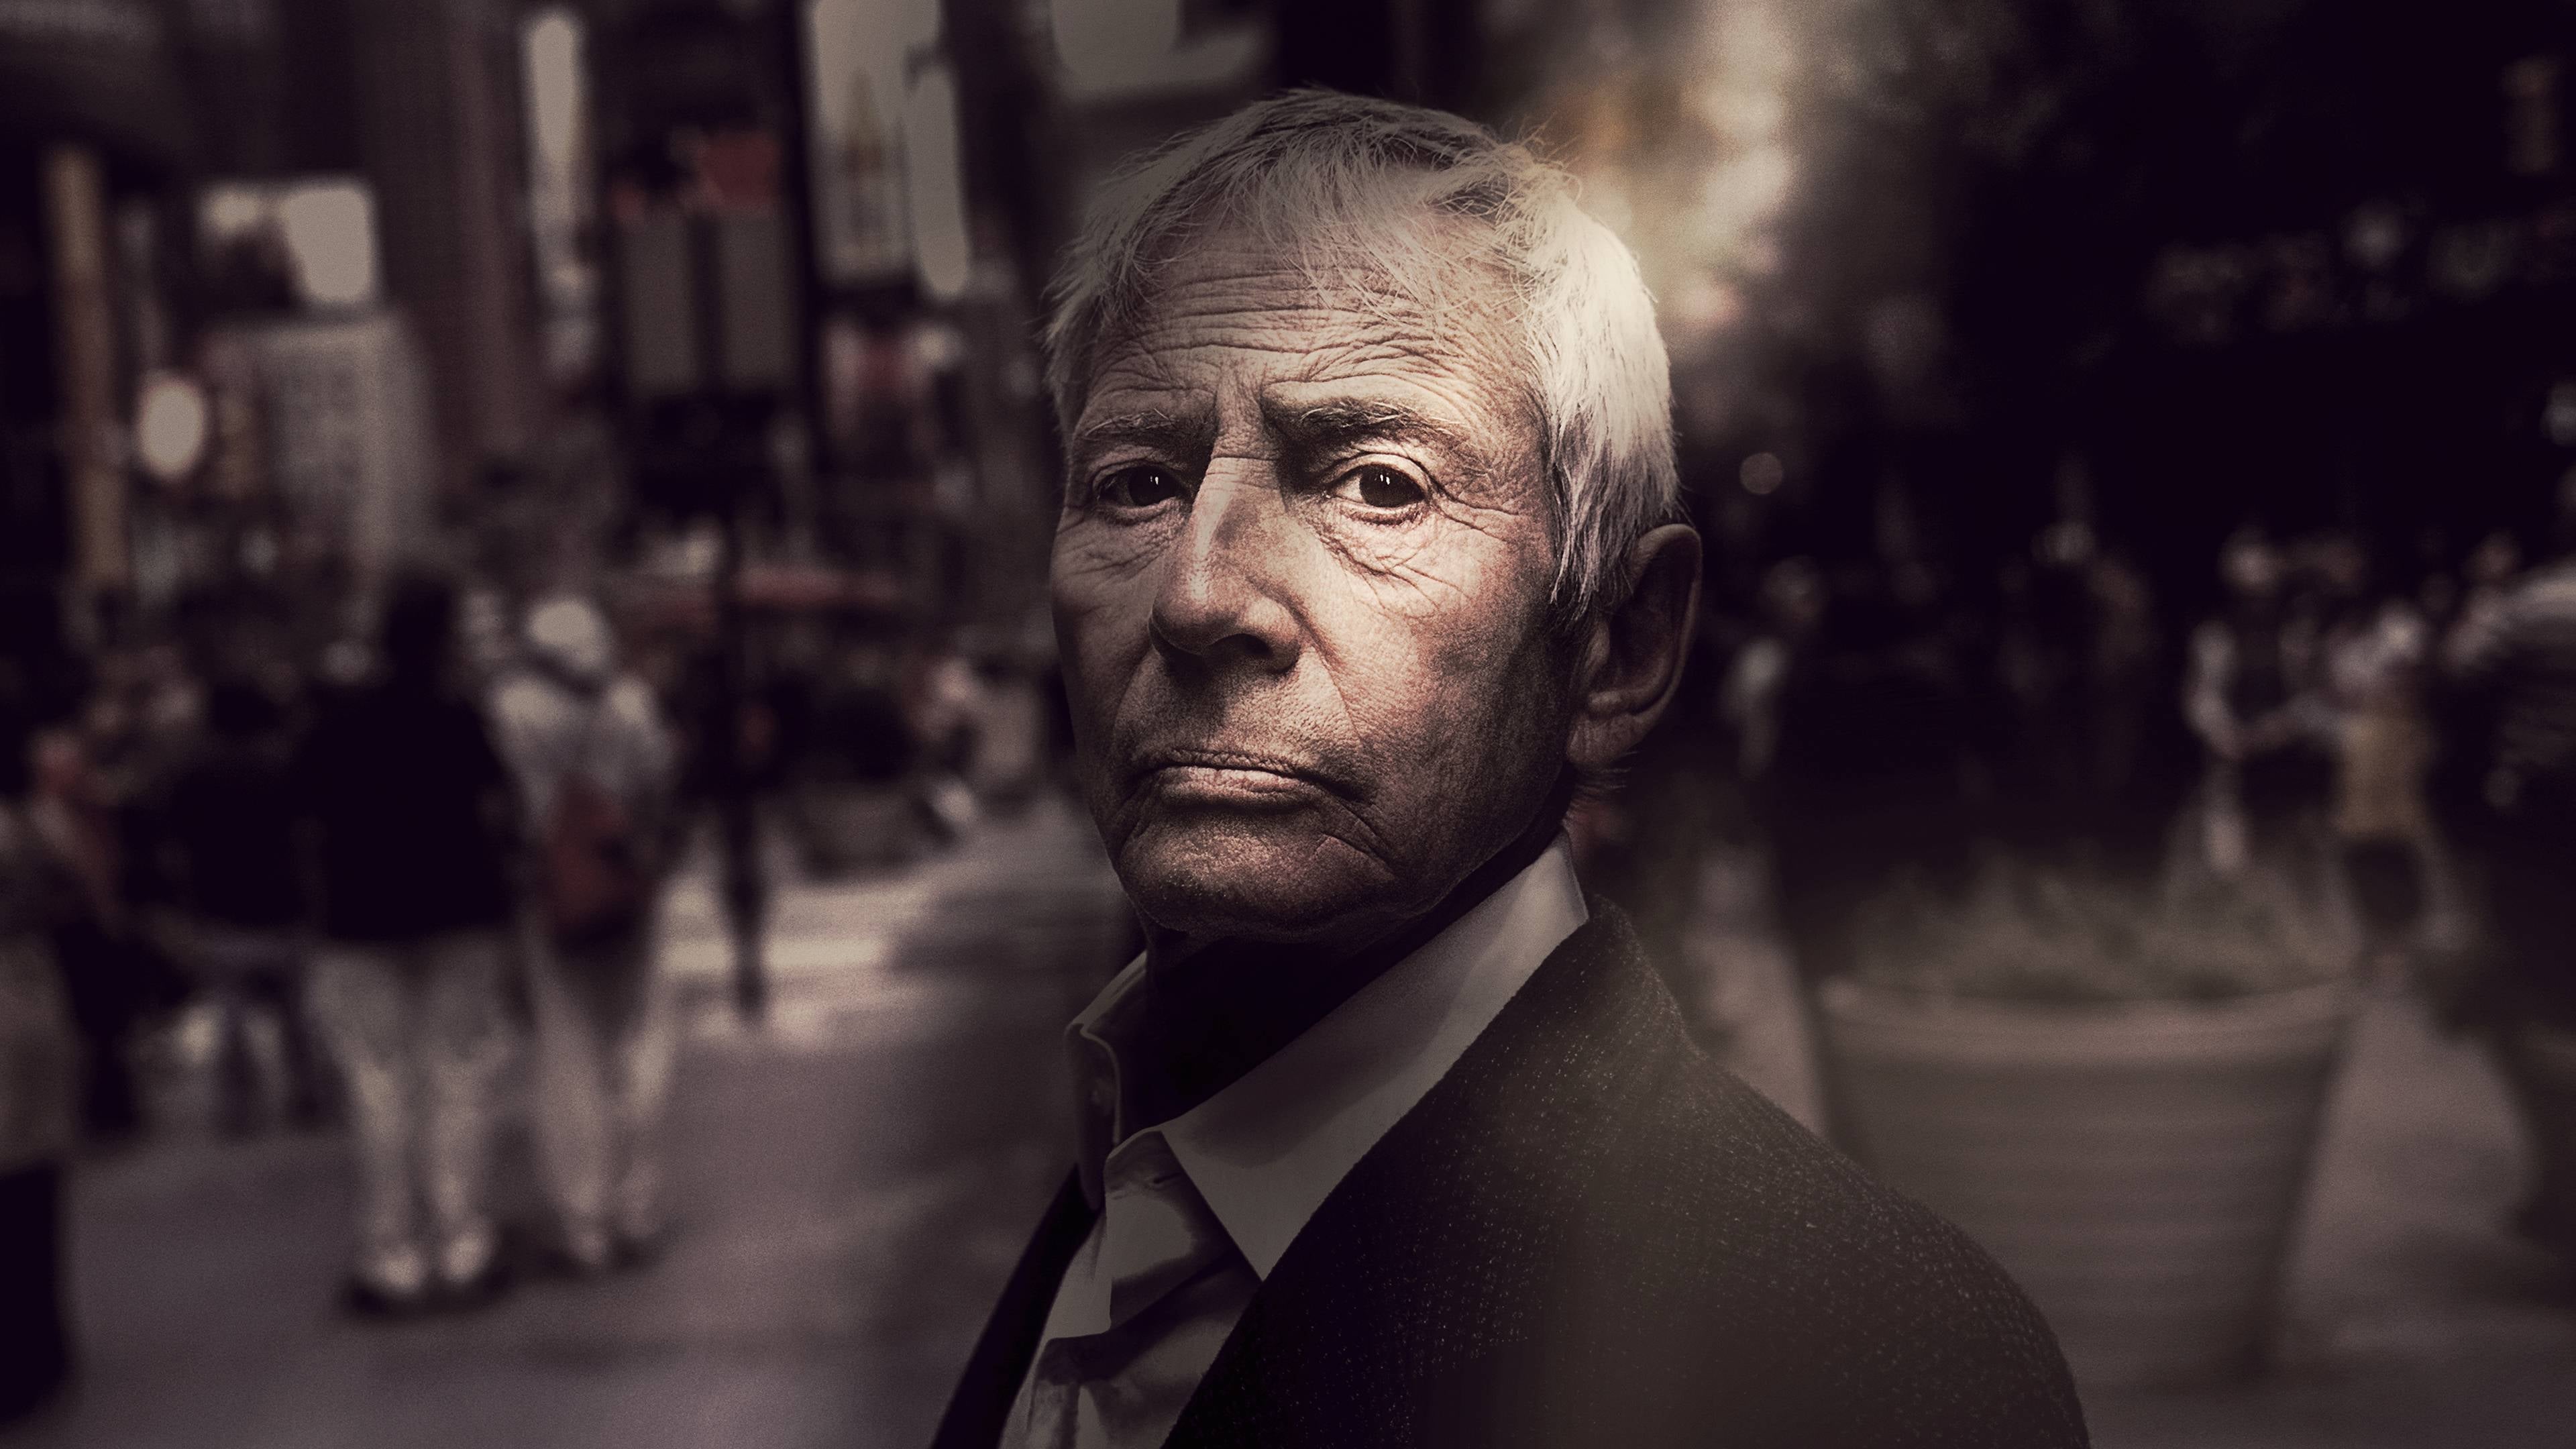 The Jinx: The Life and Deaths of Robert Durst 2015 123movies